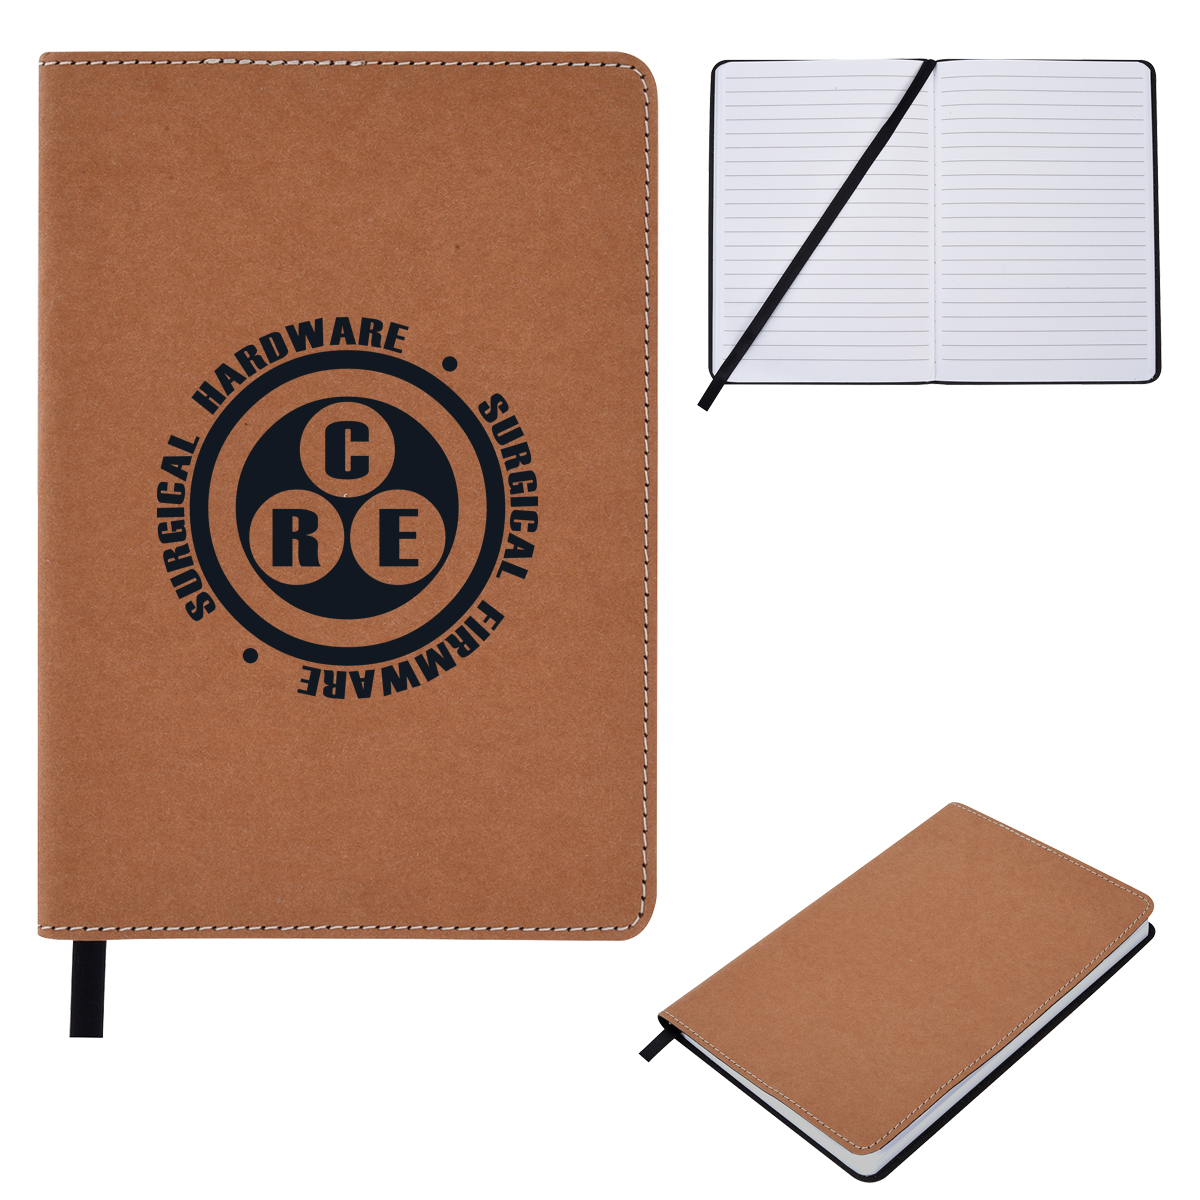 Kraft Paper Journal  Recycled  5x7 Custom Recycled Notebooks